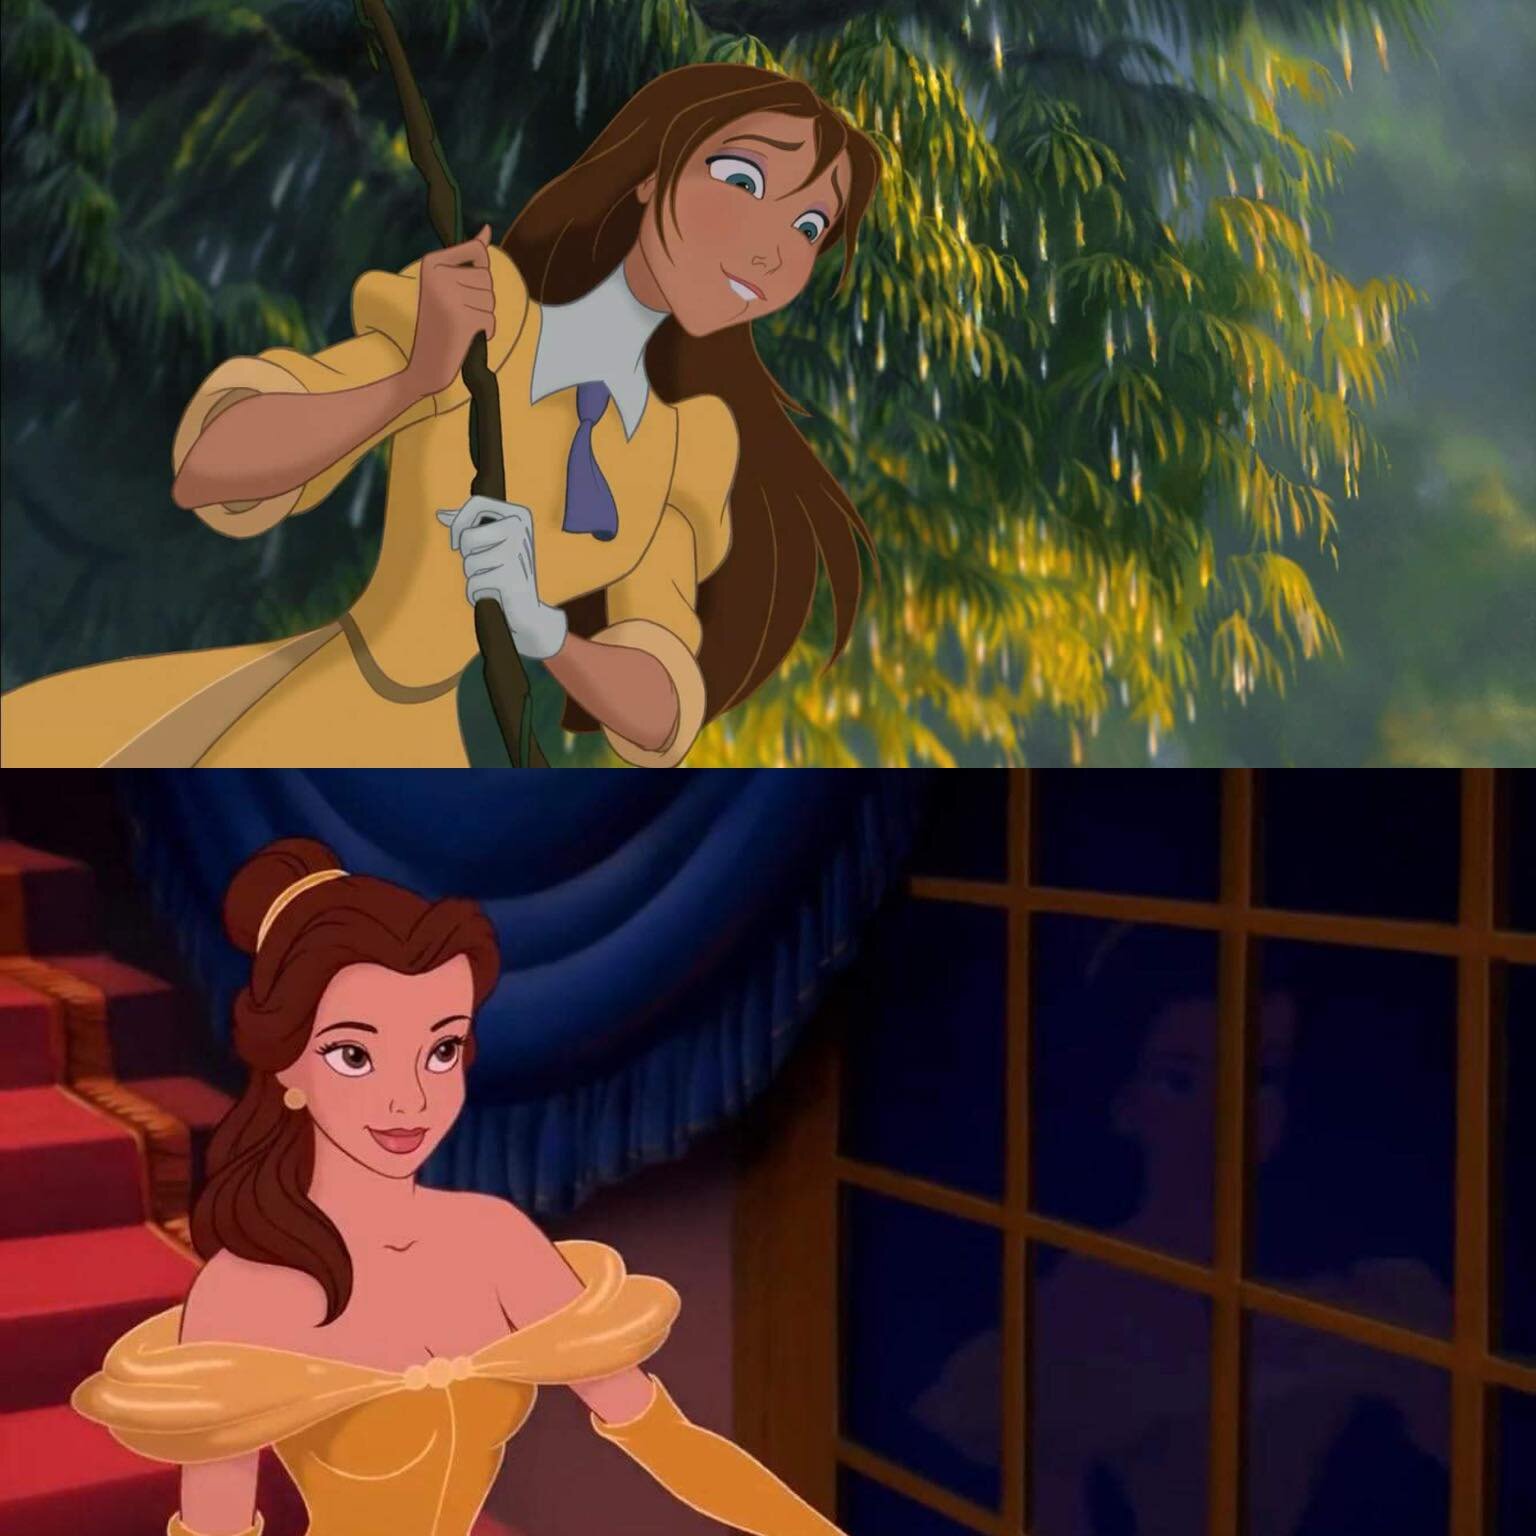 Is Tarzan a Remake of Beauty and the Beast? — The Disney Classics